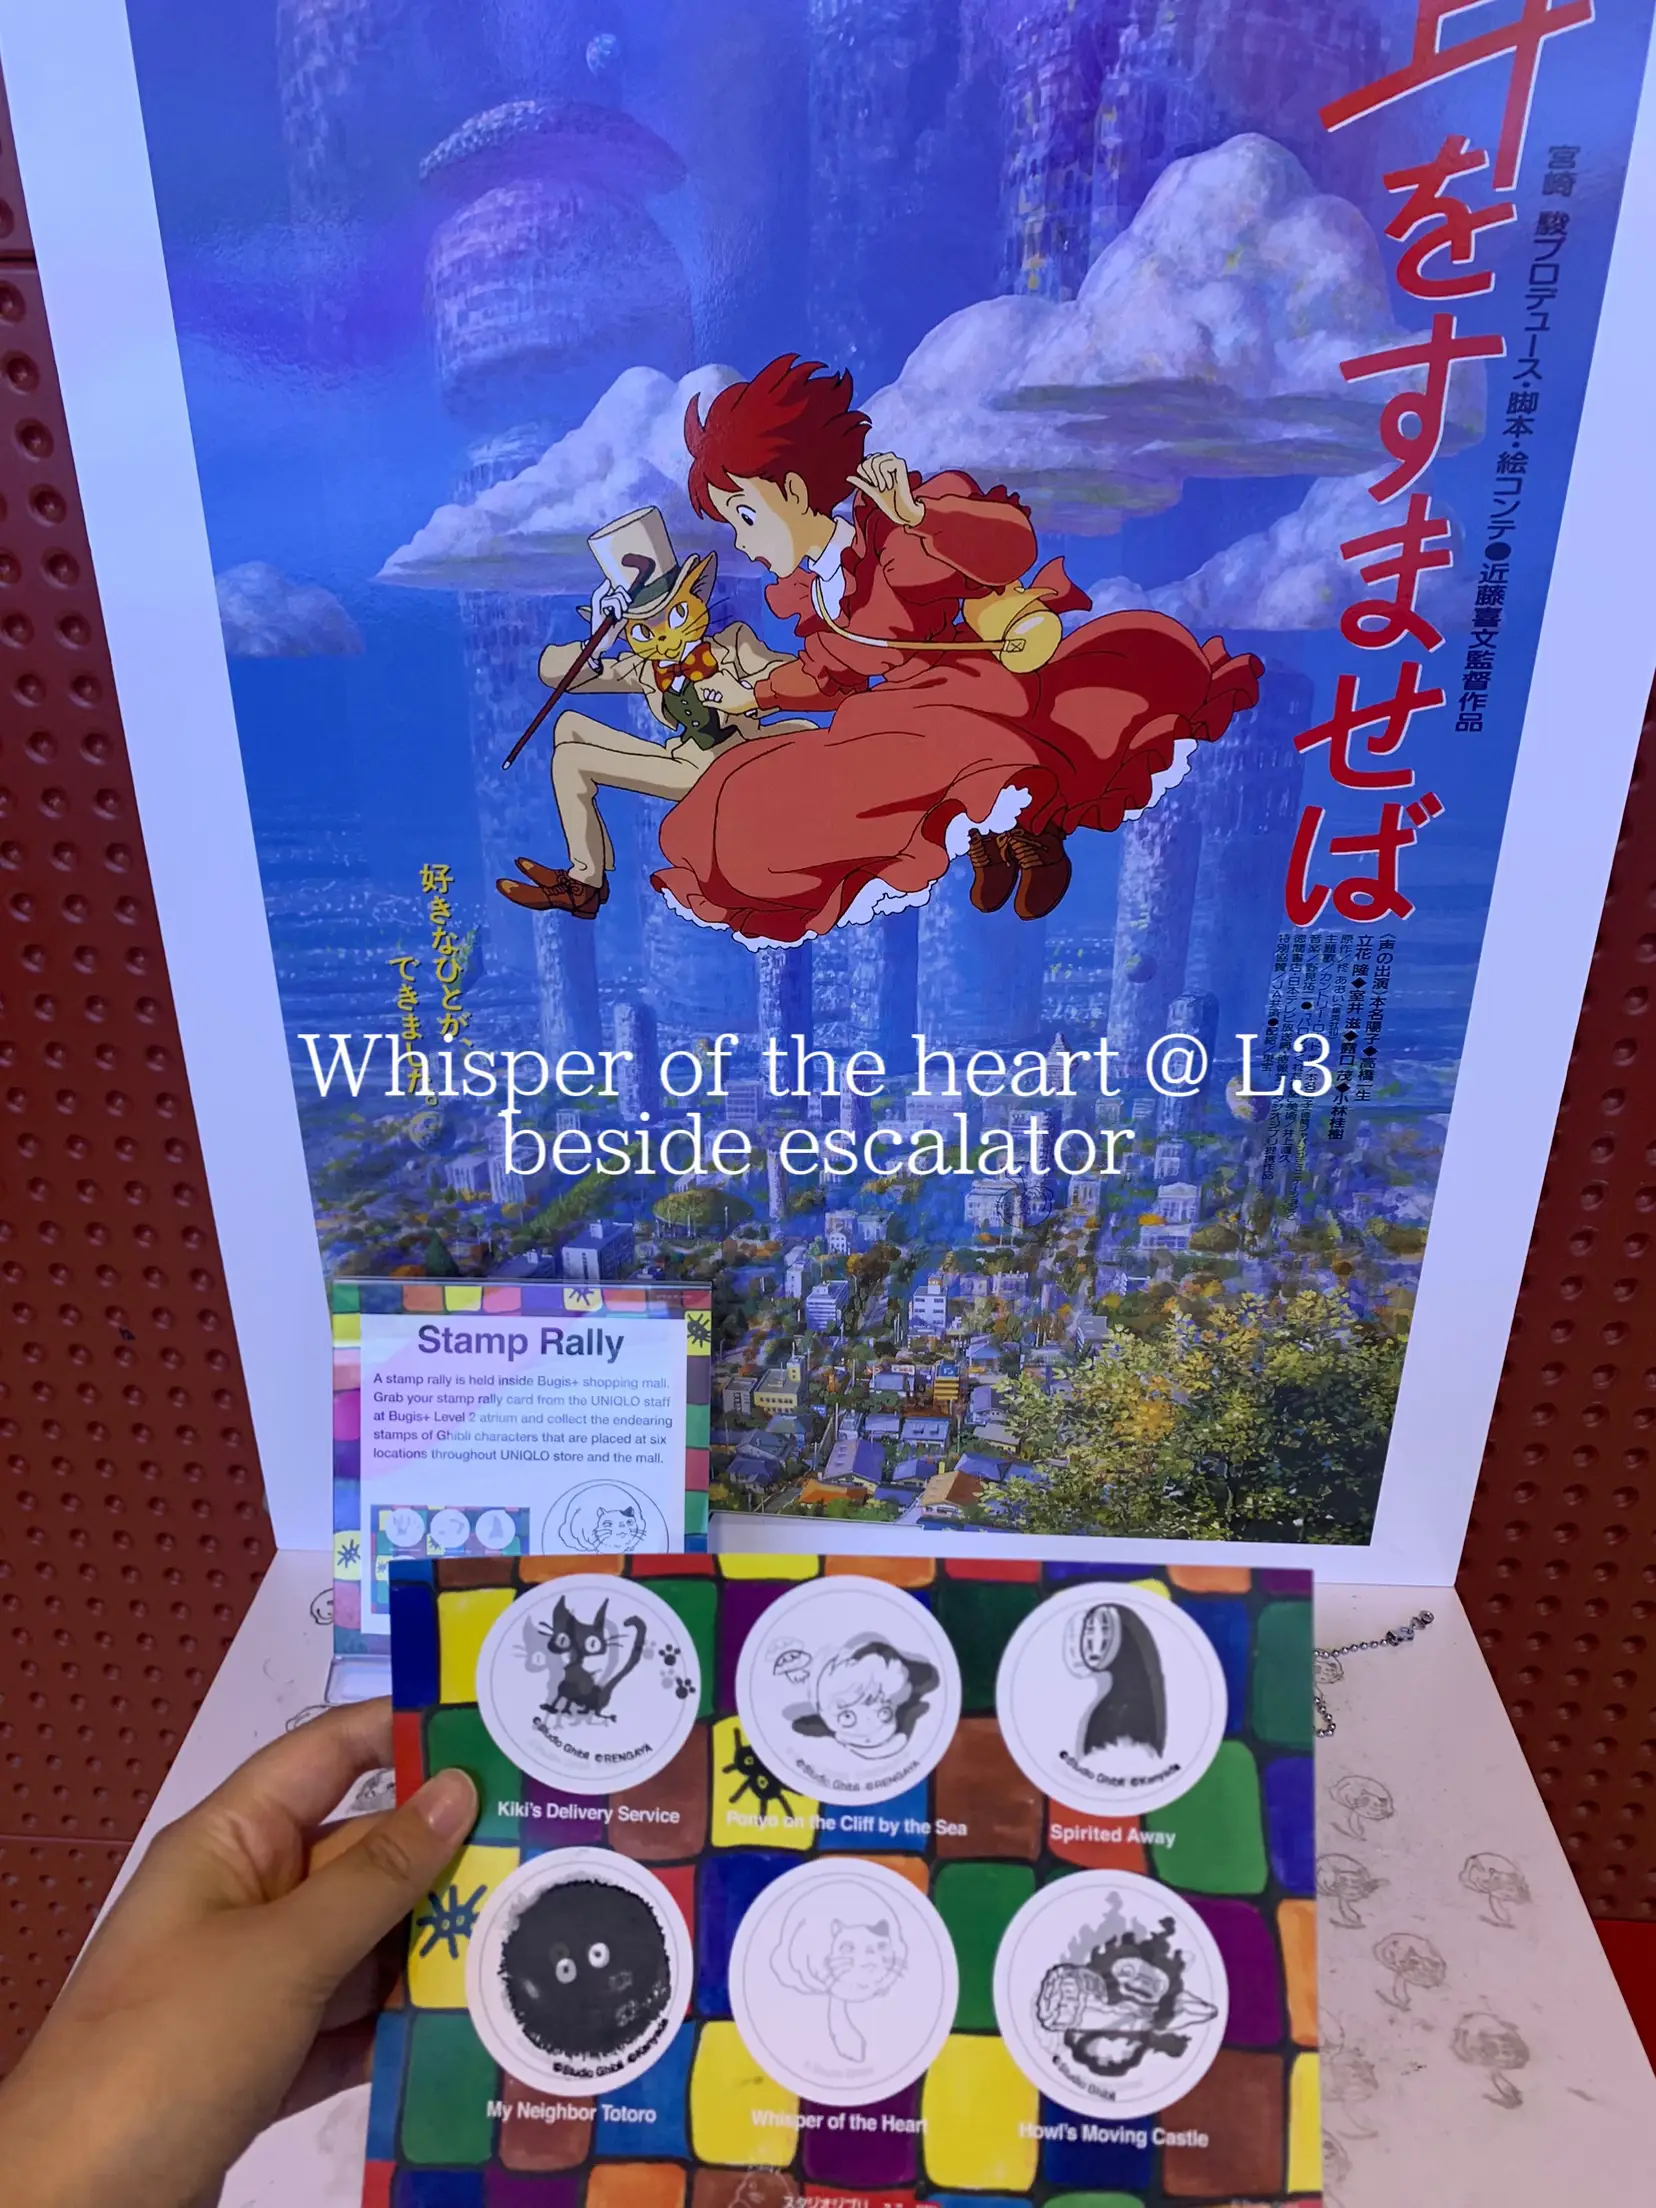 Sharla ☆ シャーラ on Instagram: Get your own Japan Travel Stamp Book at  @nekonekopost 🙌🏻🇯🇵 The Ghibli stamp rally starts today! Find 4 Ghibli  stamps at metro stations around Tokyo 👀🗼 →